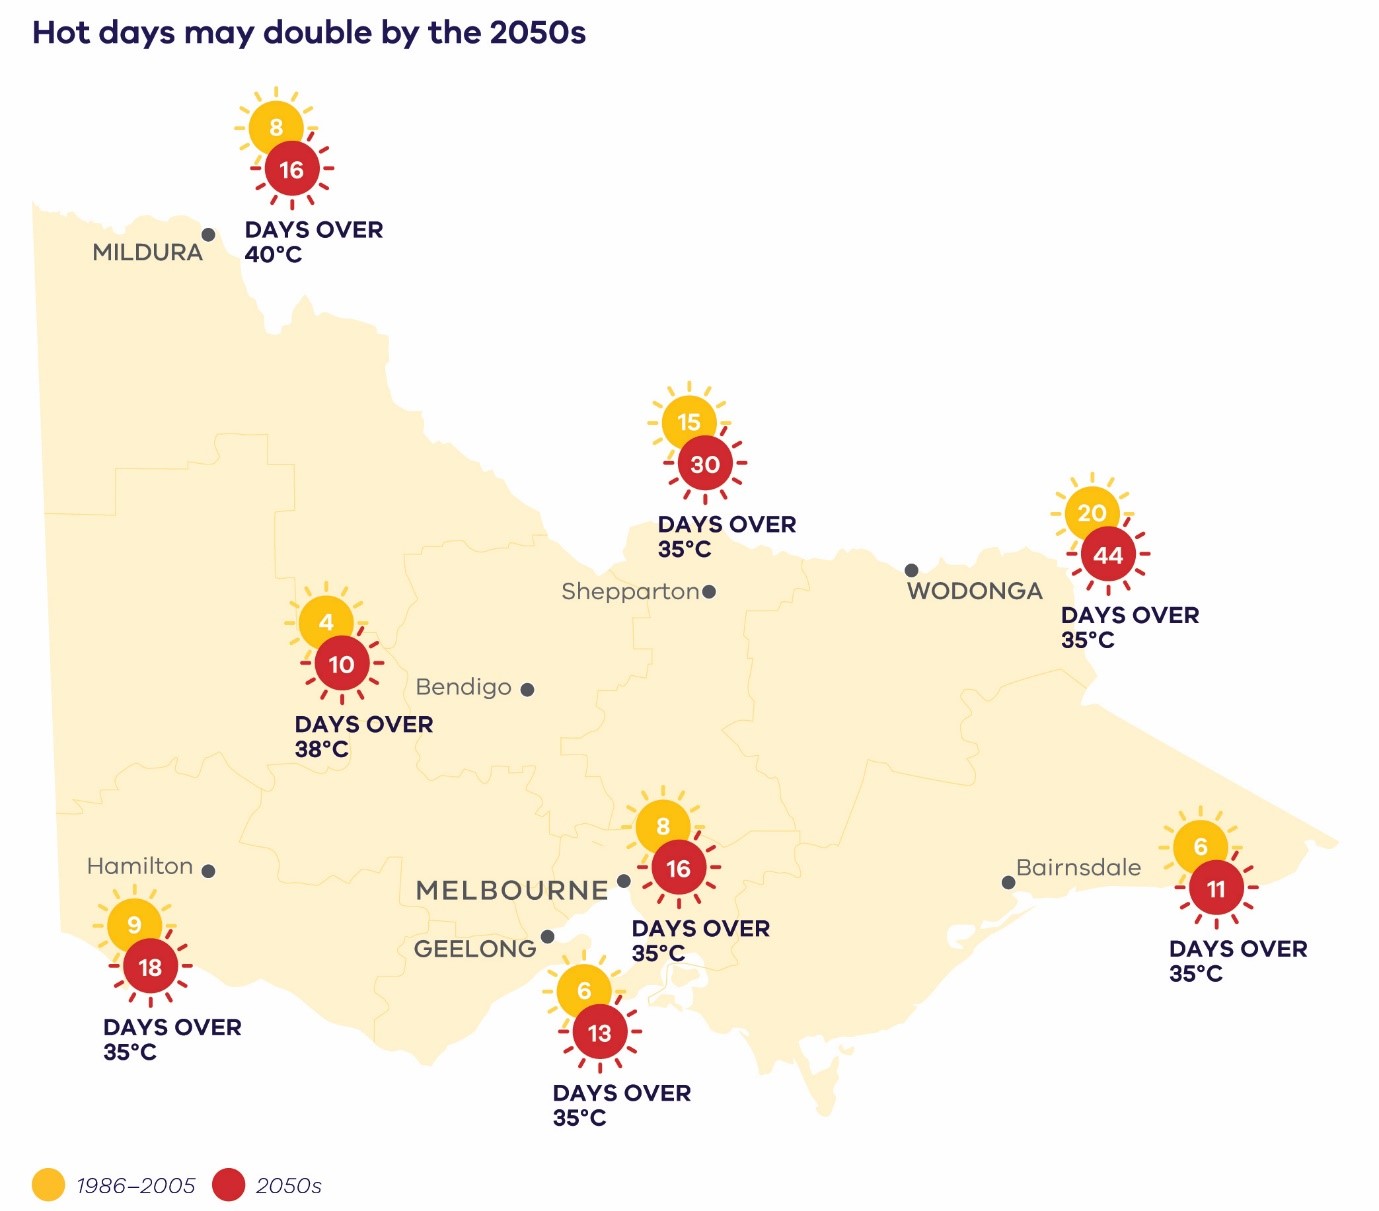 Comparison of the median number of hot days per year currently (between 1986 and 2005) and in the 2050s under high emissions (RCP 8.5). Hot days have maximum temperature greater than the thresholds of 35°C, 38°C and 40°C for locations across Victoria (CSIRO, 2019).